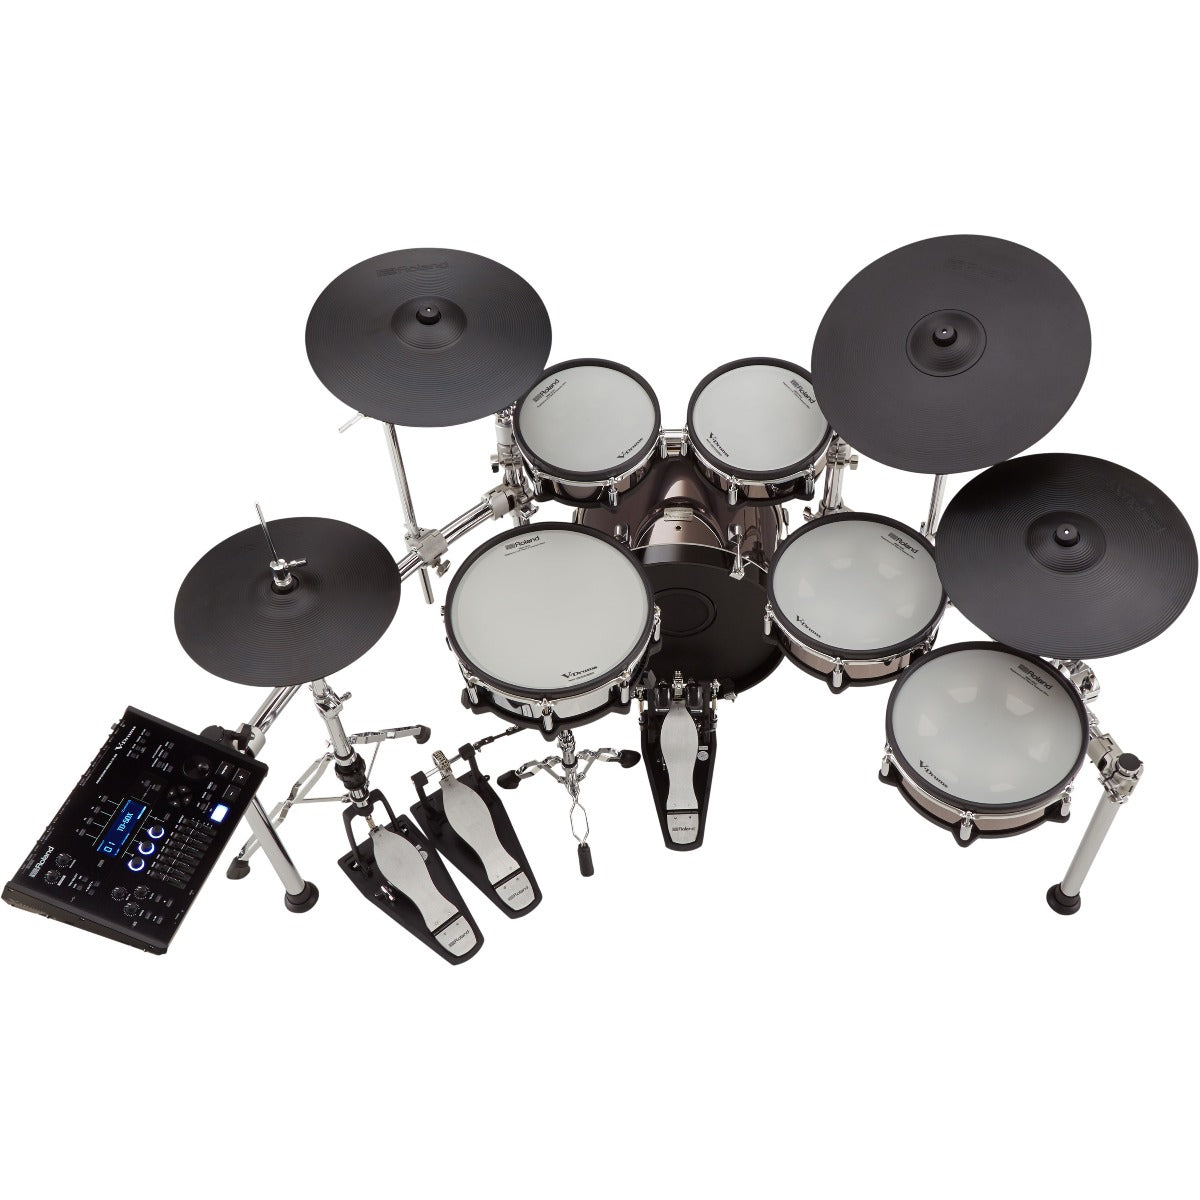 Perspective view of Roland TD-50KV2 V-Drums Electronic Drum Set showing top and back